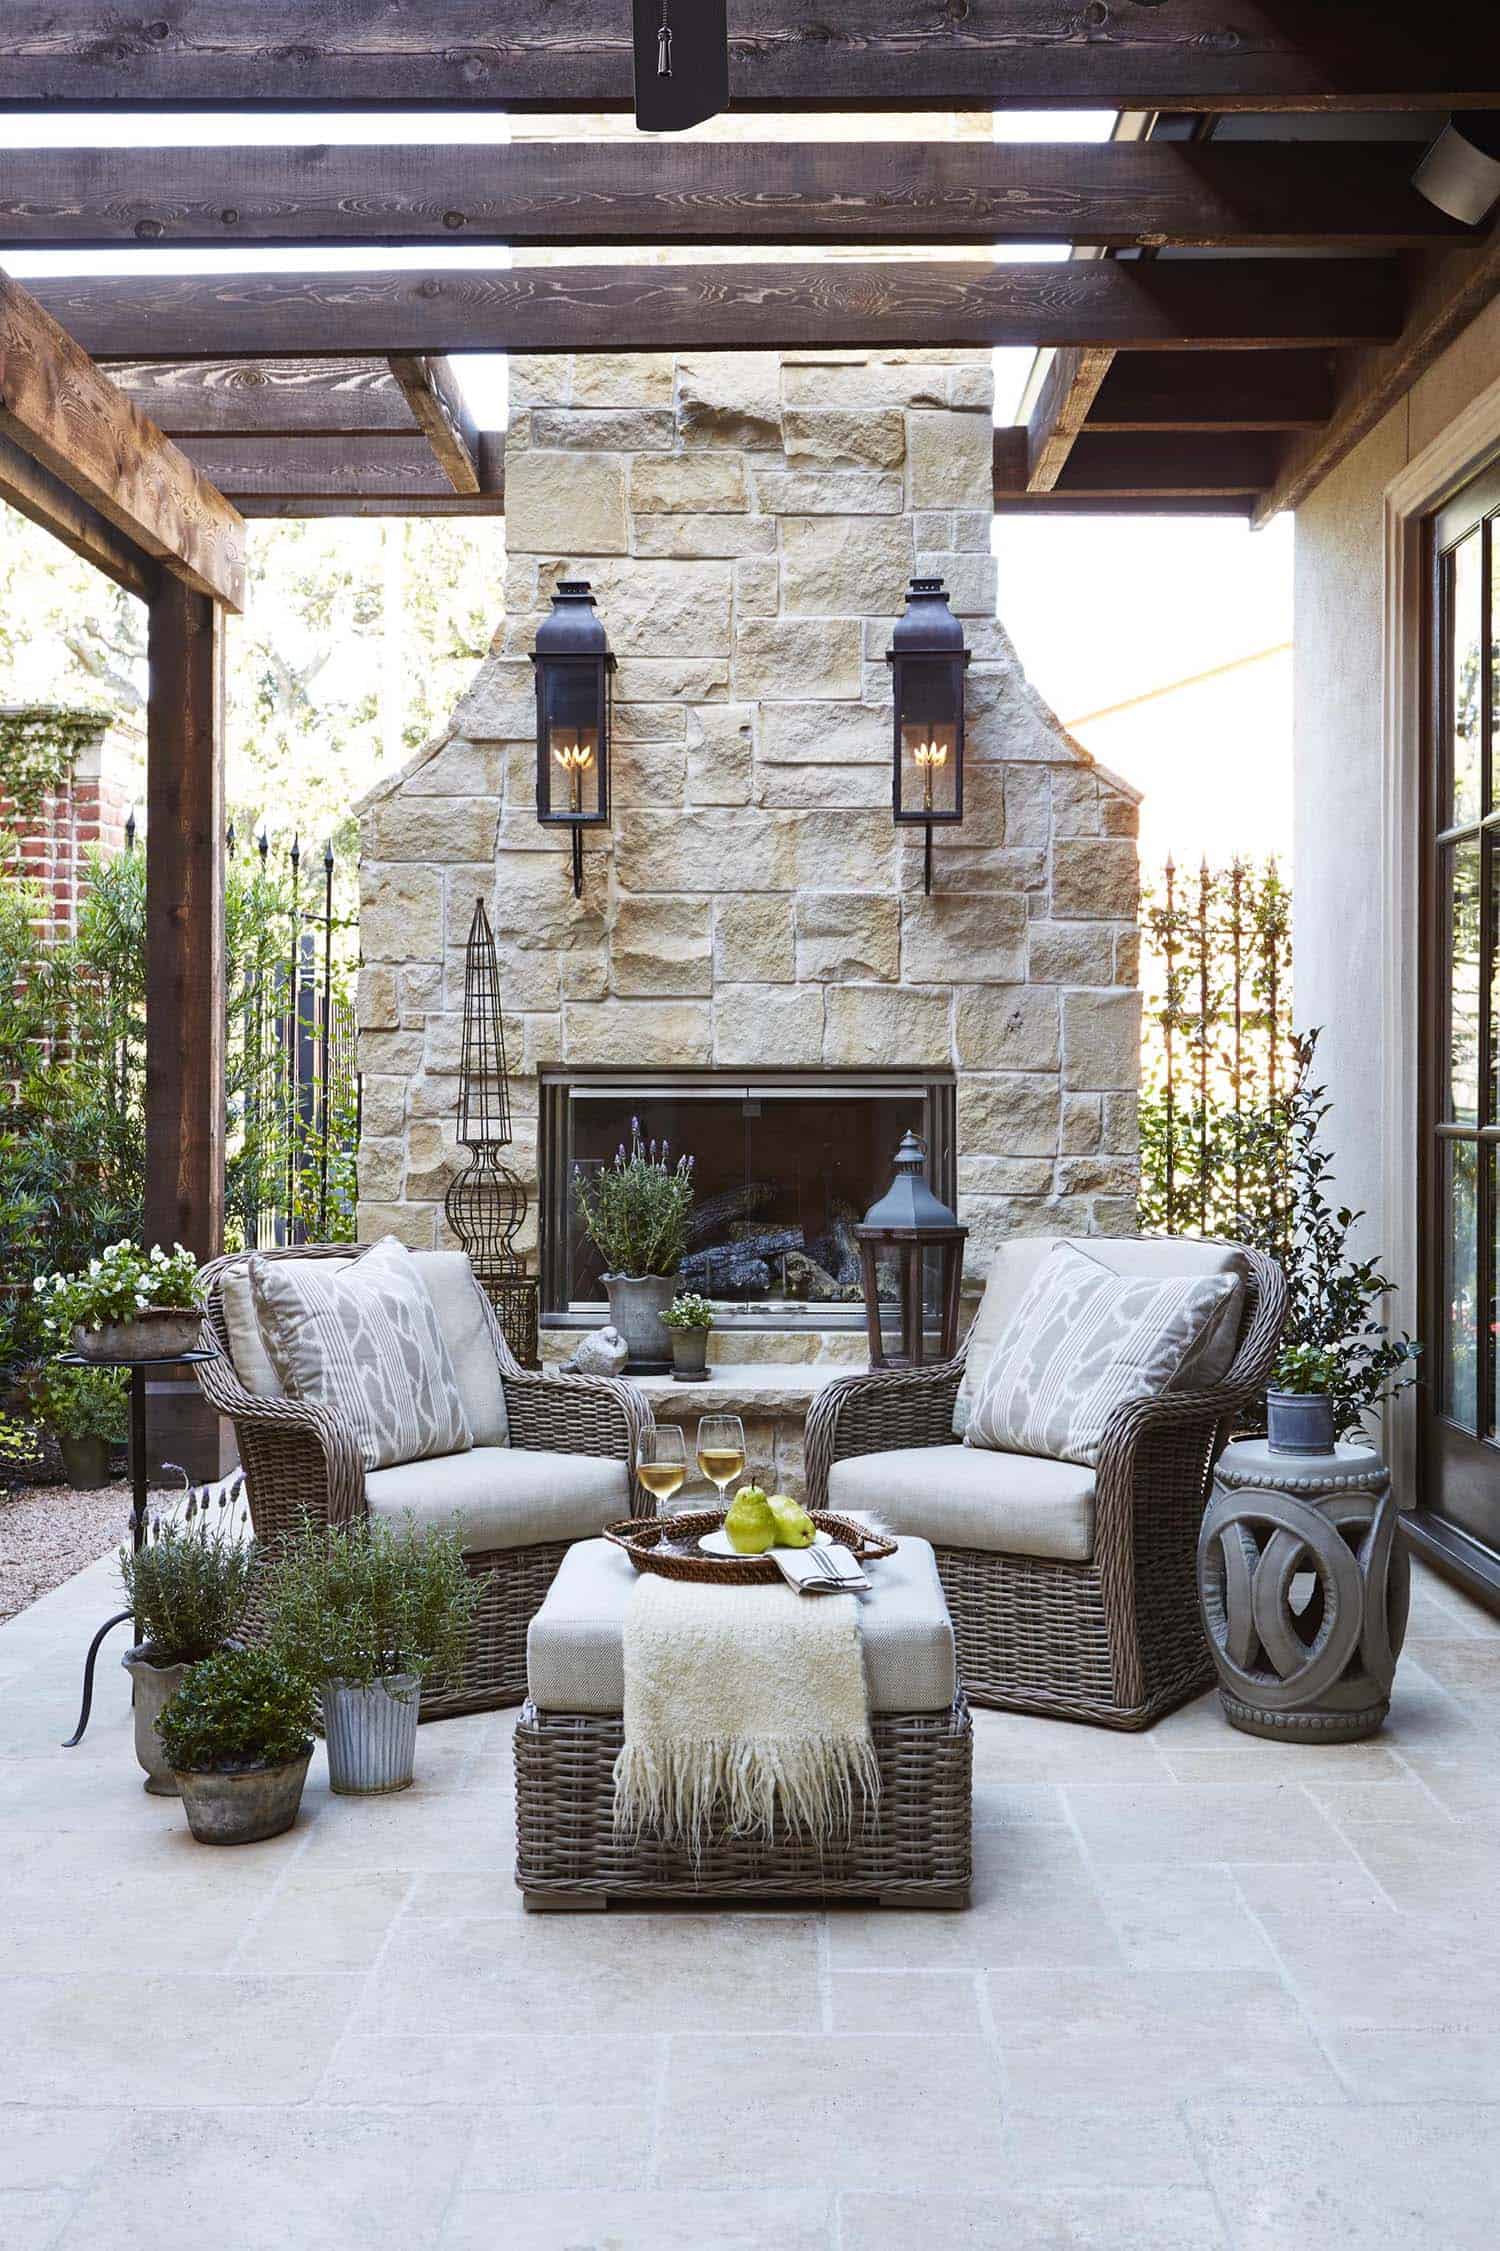 Irresistible Outdoor Fireplace Ideas, Outdoor Fireplace Against Wall